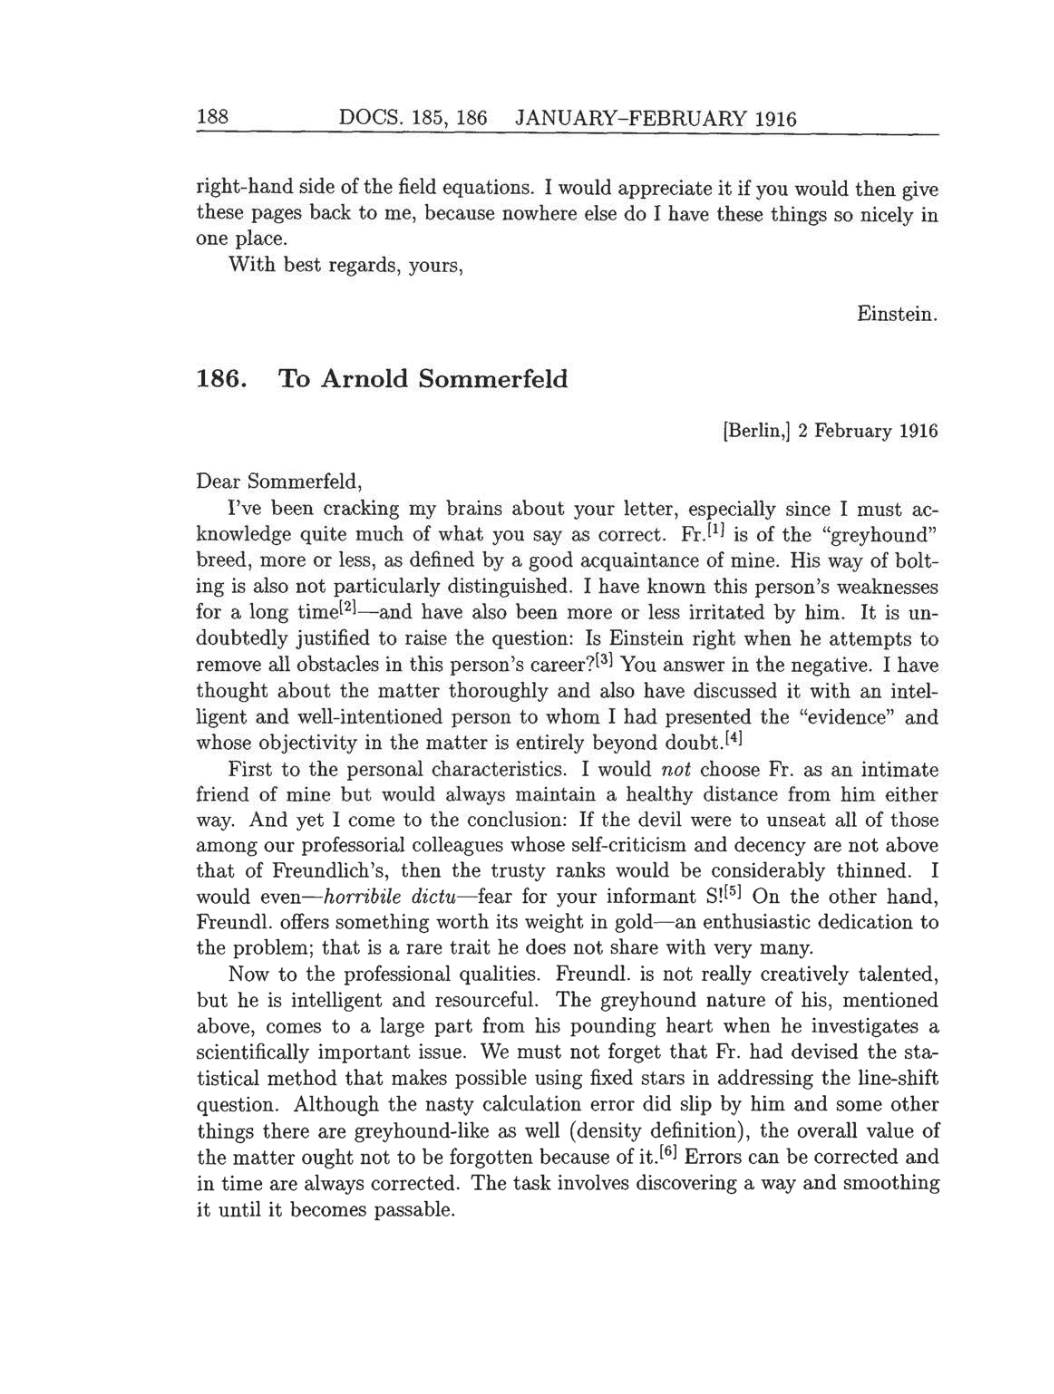 Volume 8: The Berlin Years: Correspondence, 1914-1918 (English translation supplement) page 188